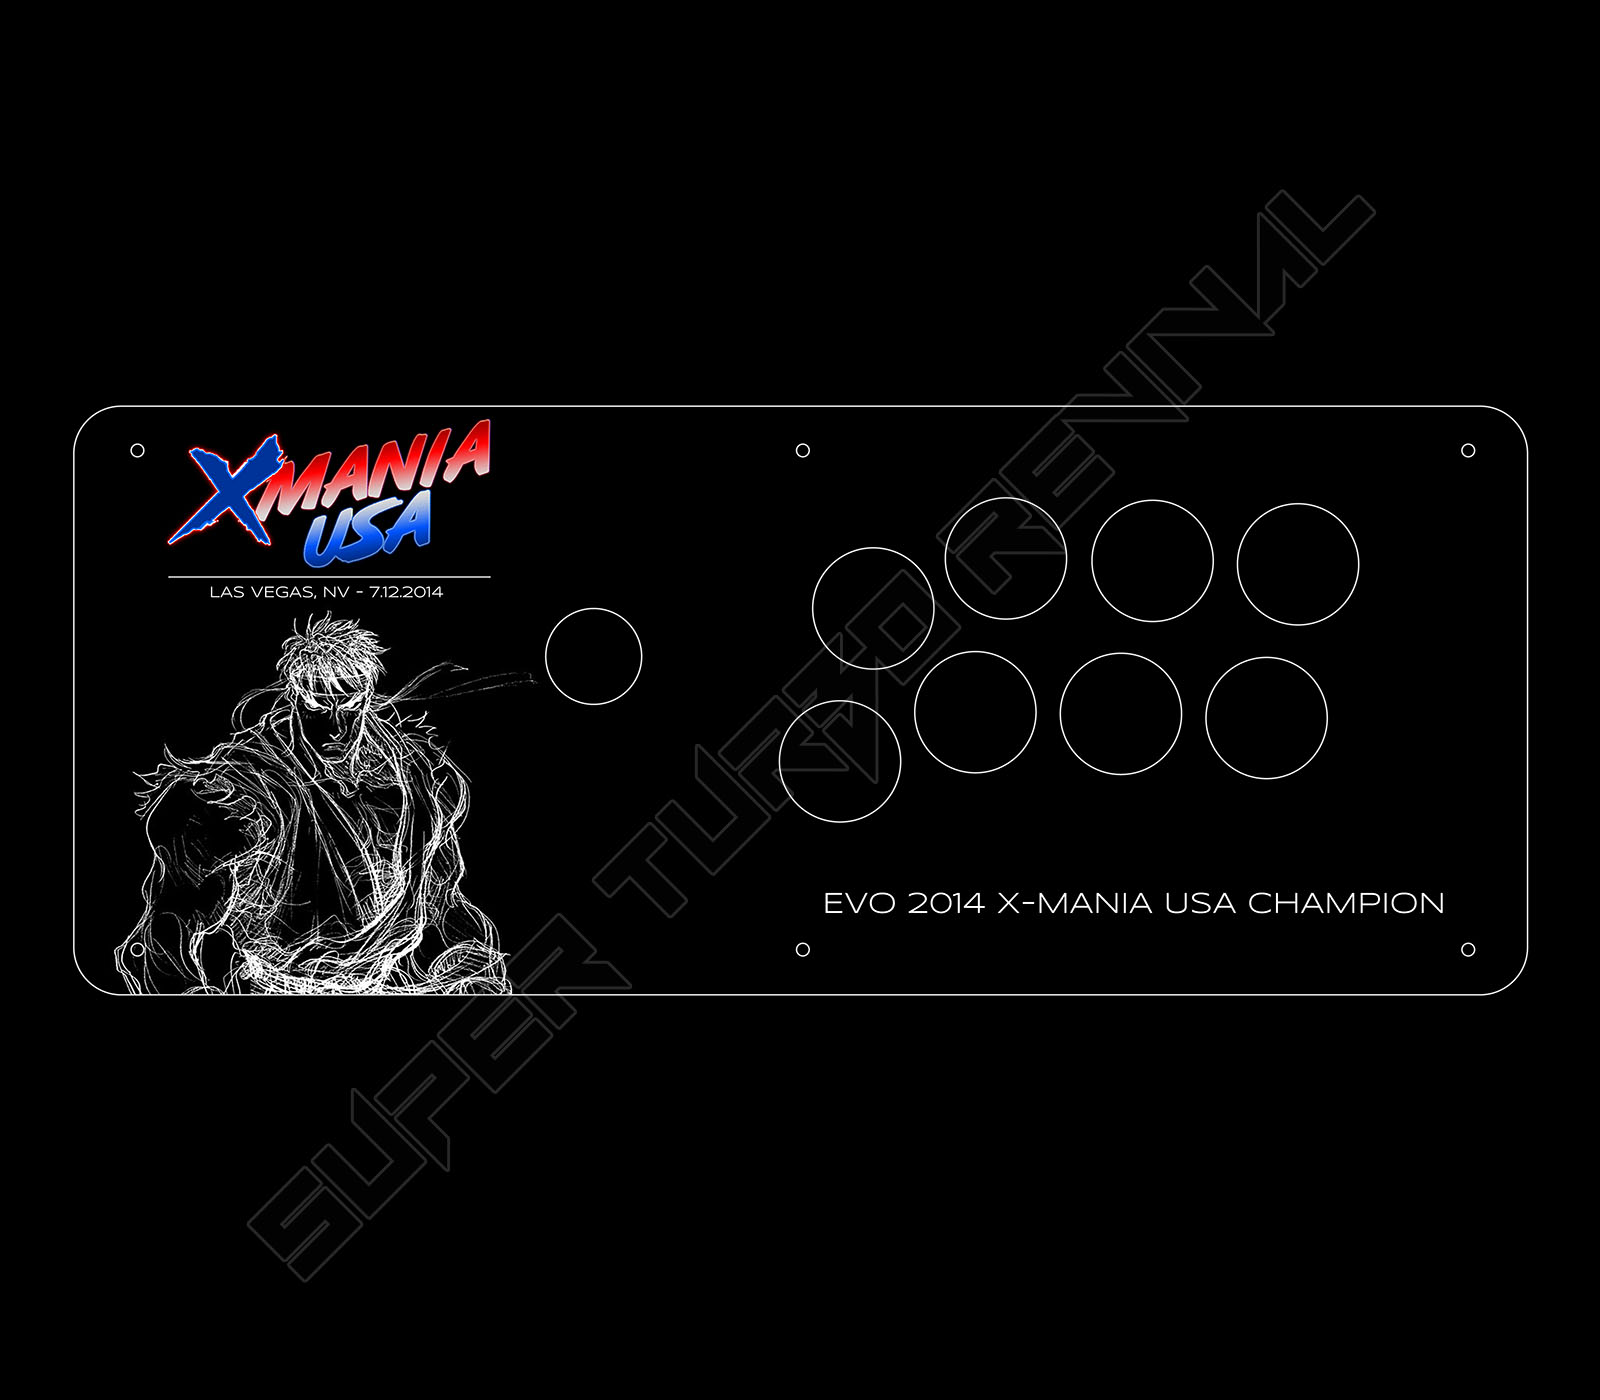 Art used for fightsticks that would be given to the winners of X-MANIA USA